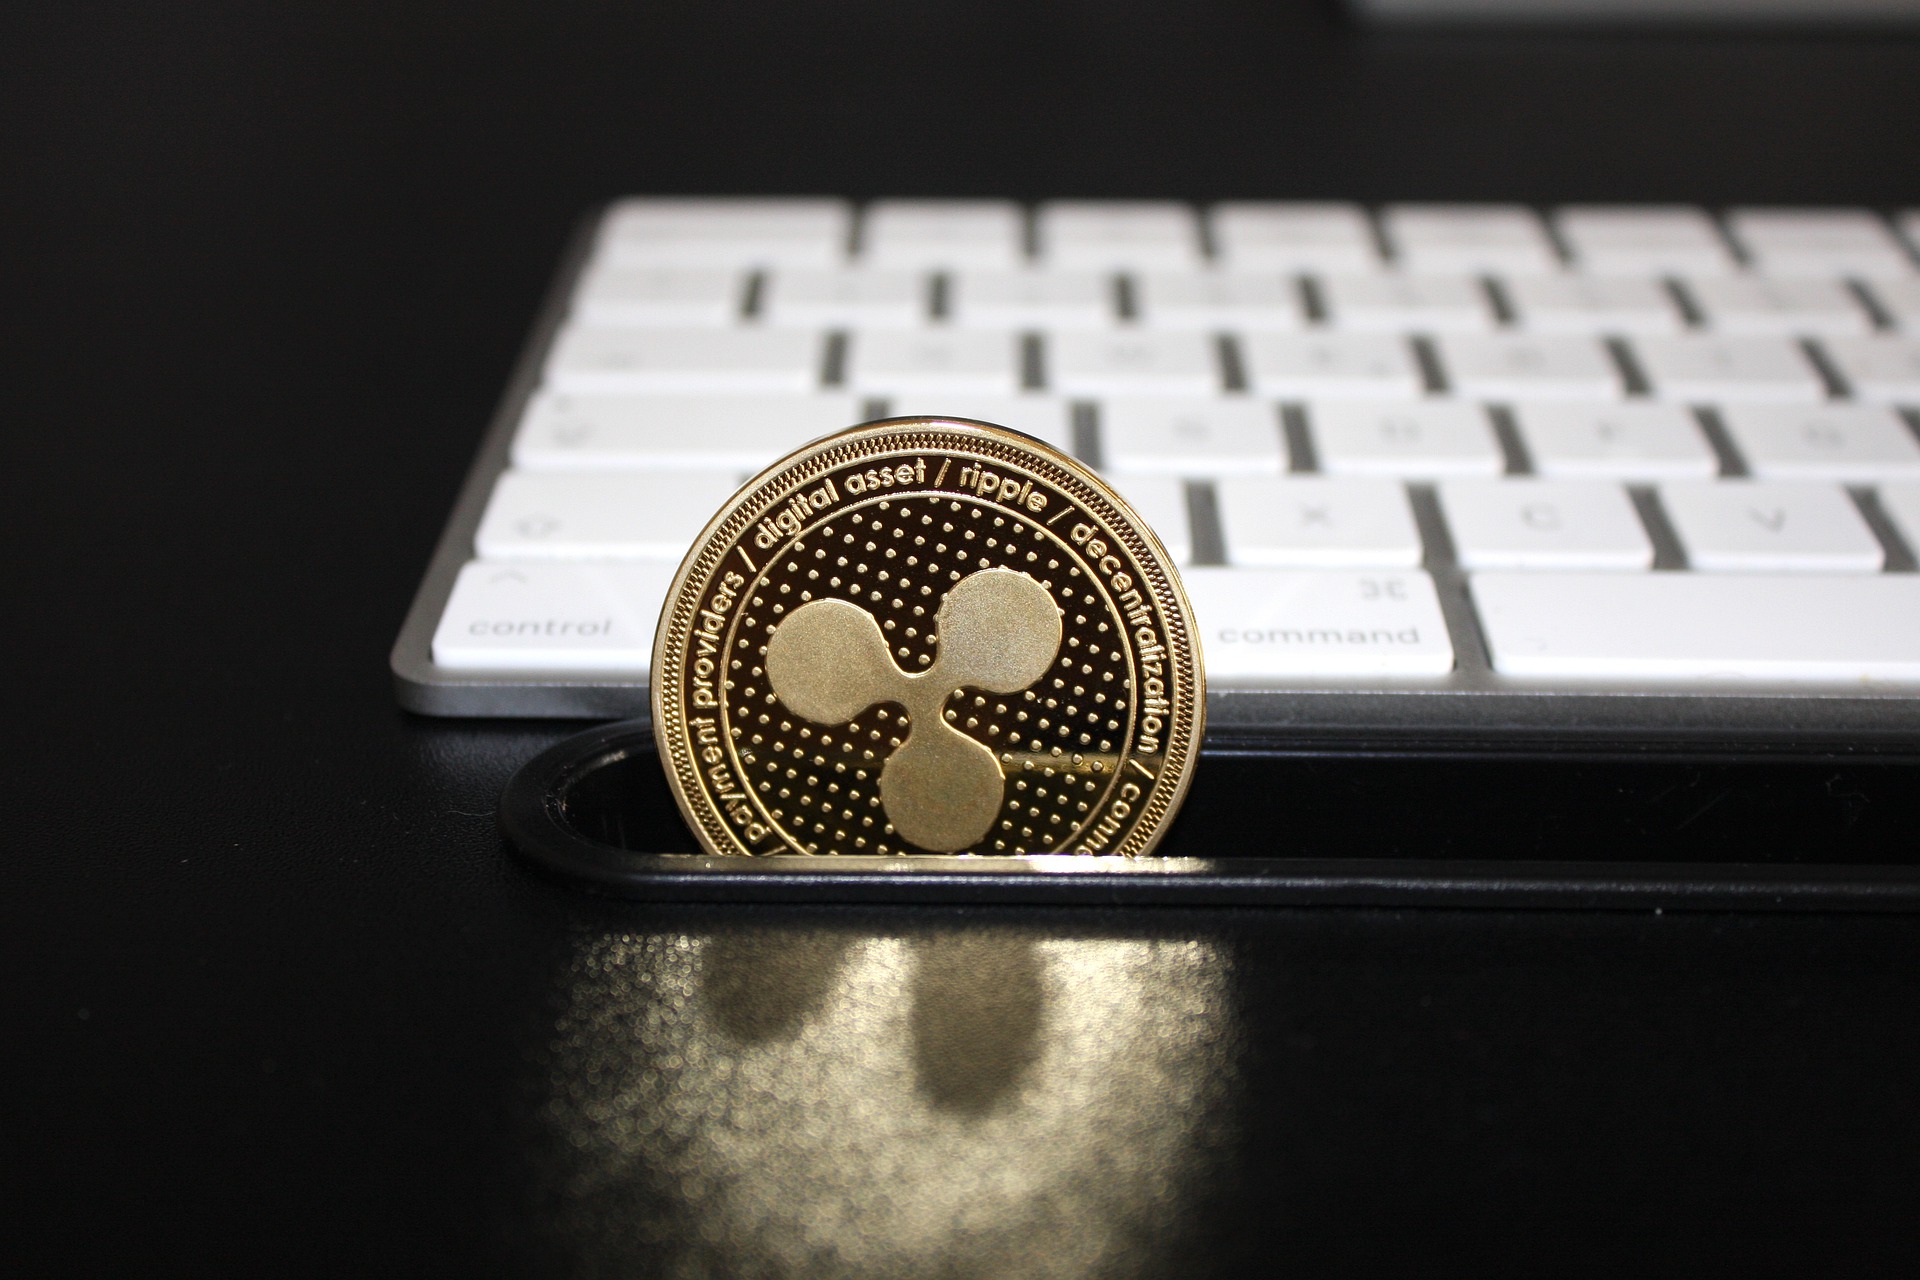 Legal Team Of Ripple Has No Plans To Settle Lawsuit With SEC